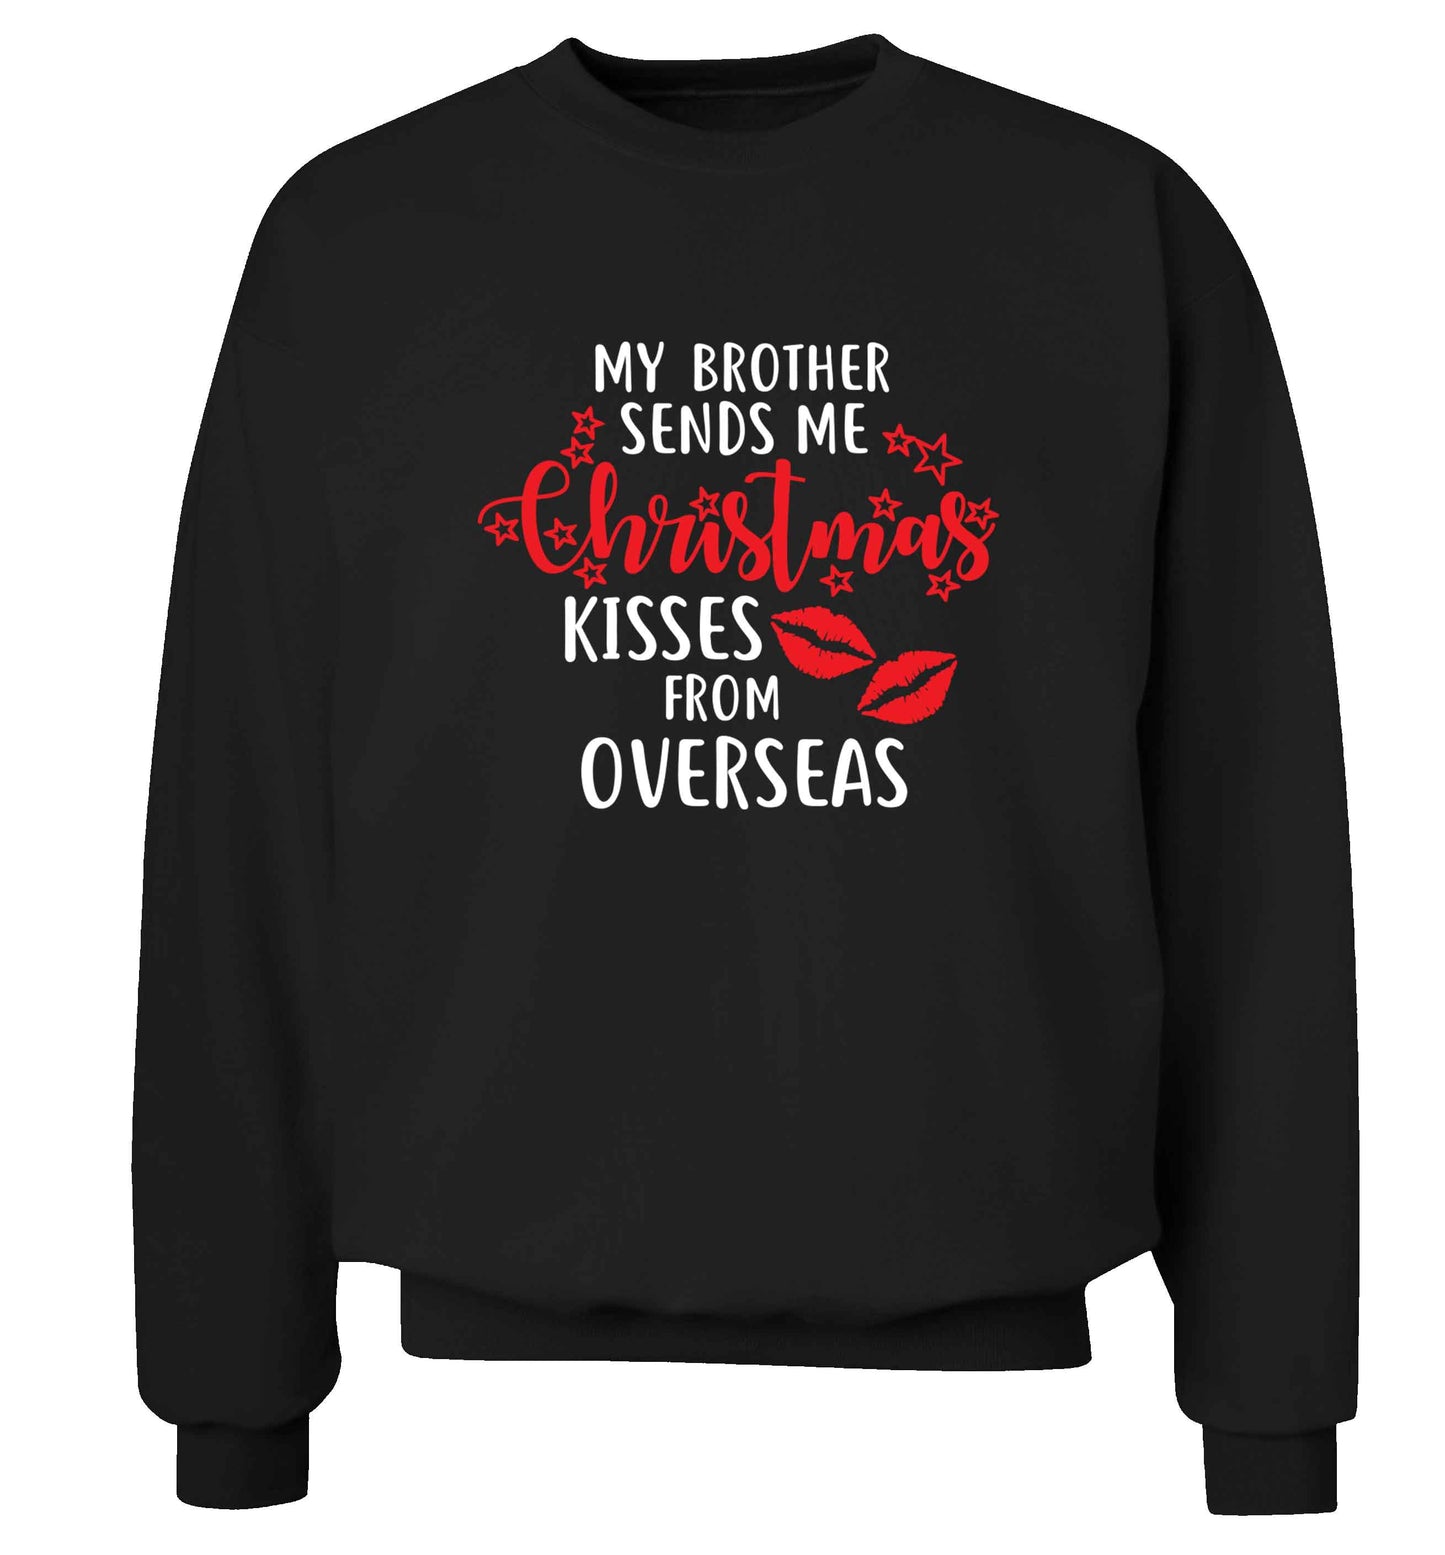 Brother Christmas Kisses Overseas adult's unisex black sweater 2XL